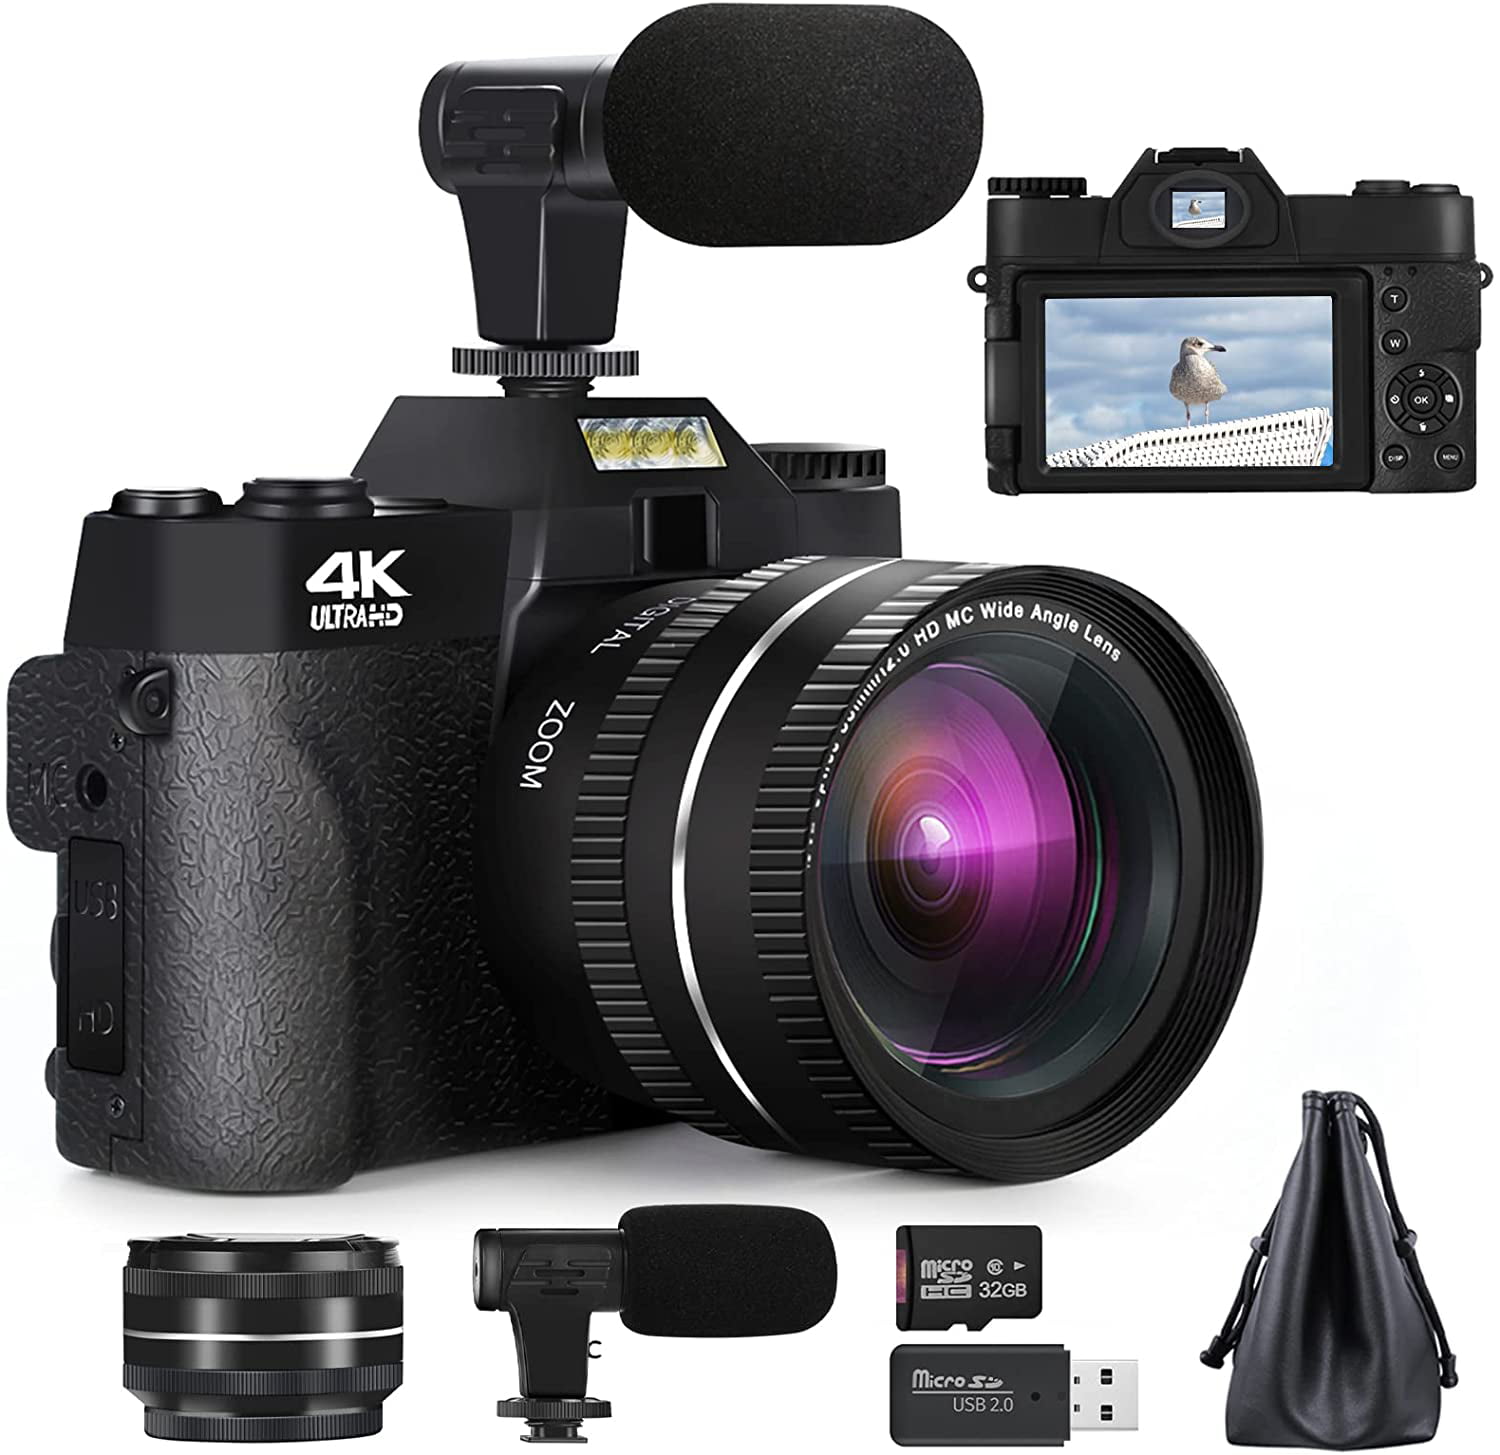 NBD Digital Camera 4K 48MP Compact Camera, 3.0 Inch Ultra Clear Screen YouTube Vlogging Camera with Wide Angle Lens and 16x Digital Zoom Video Camera, Cameras for Photography